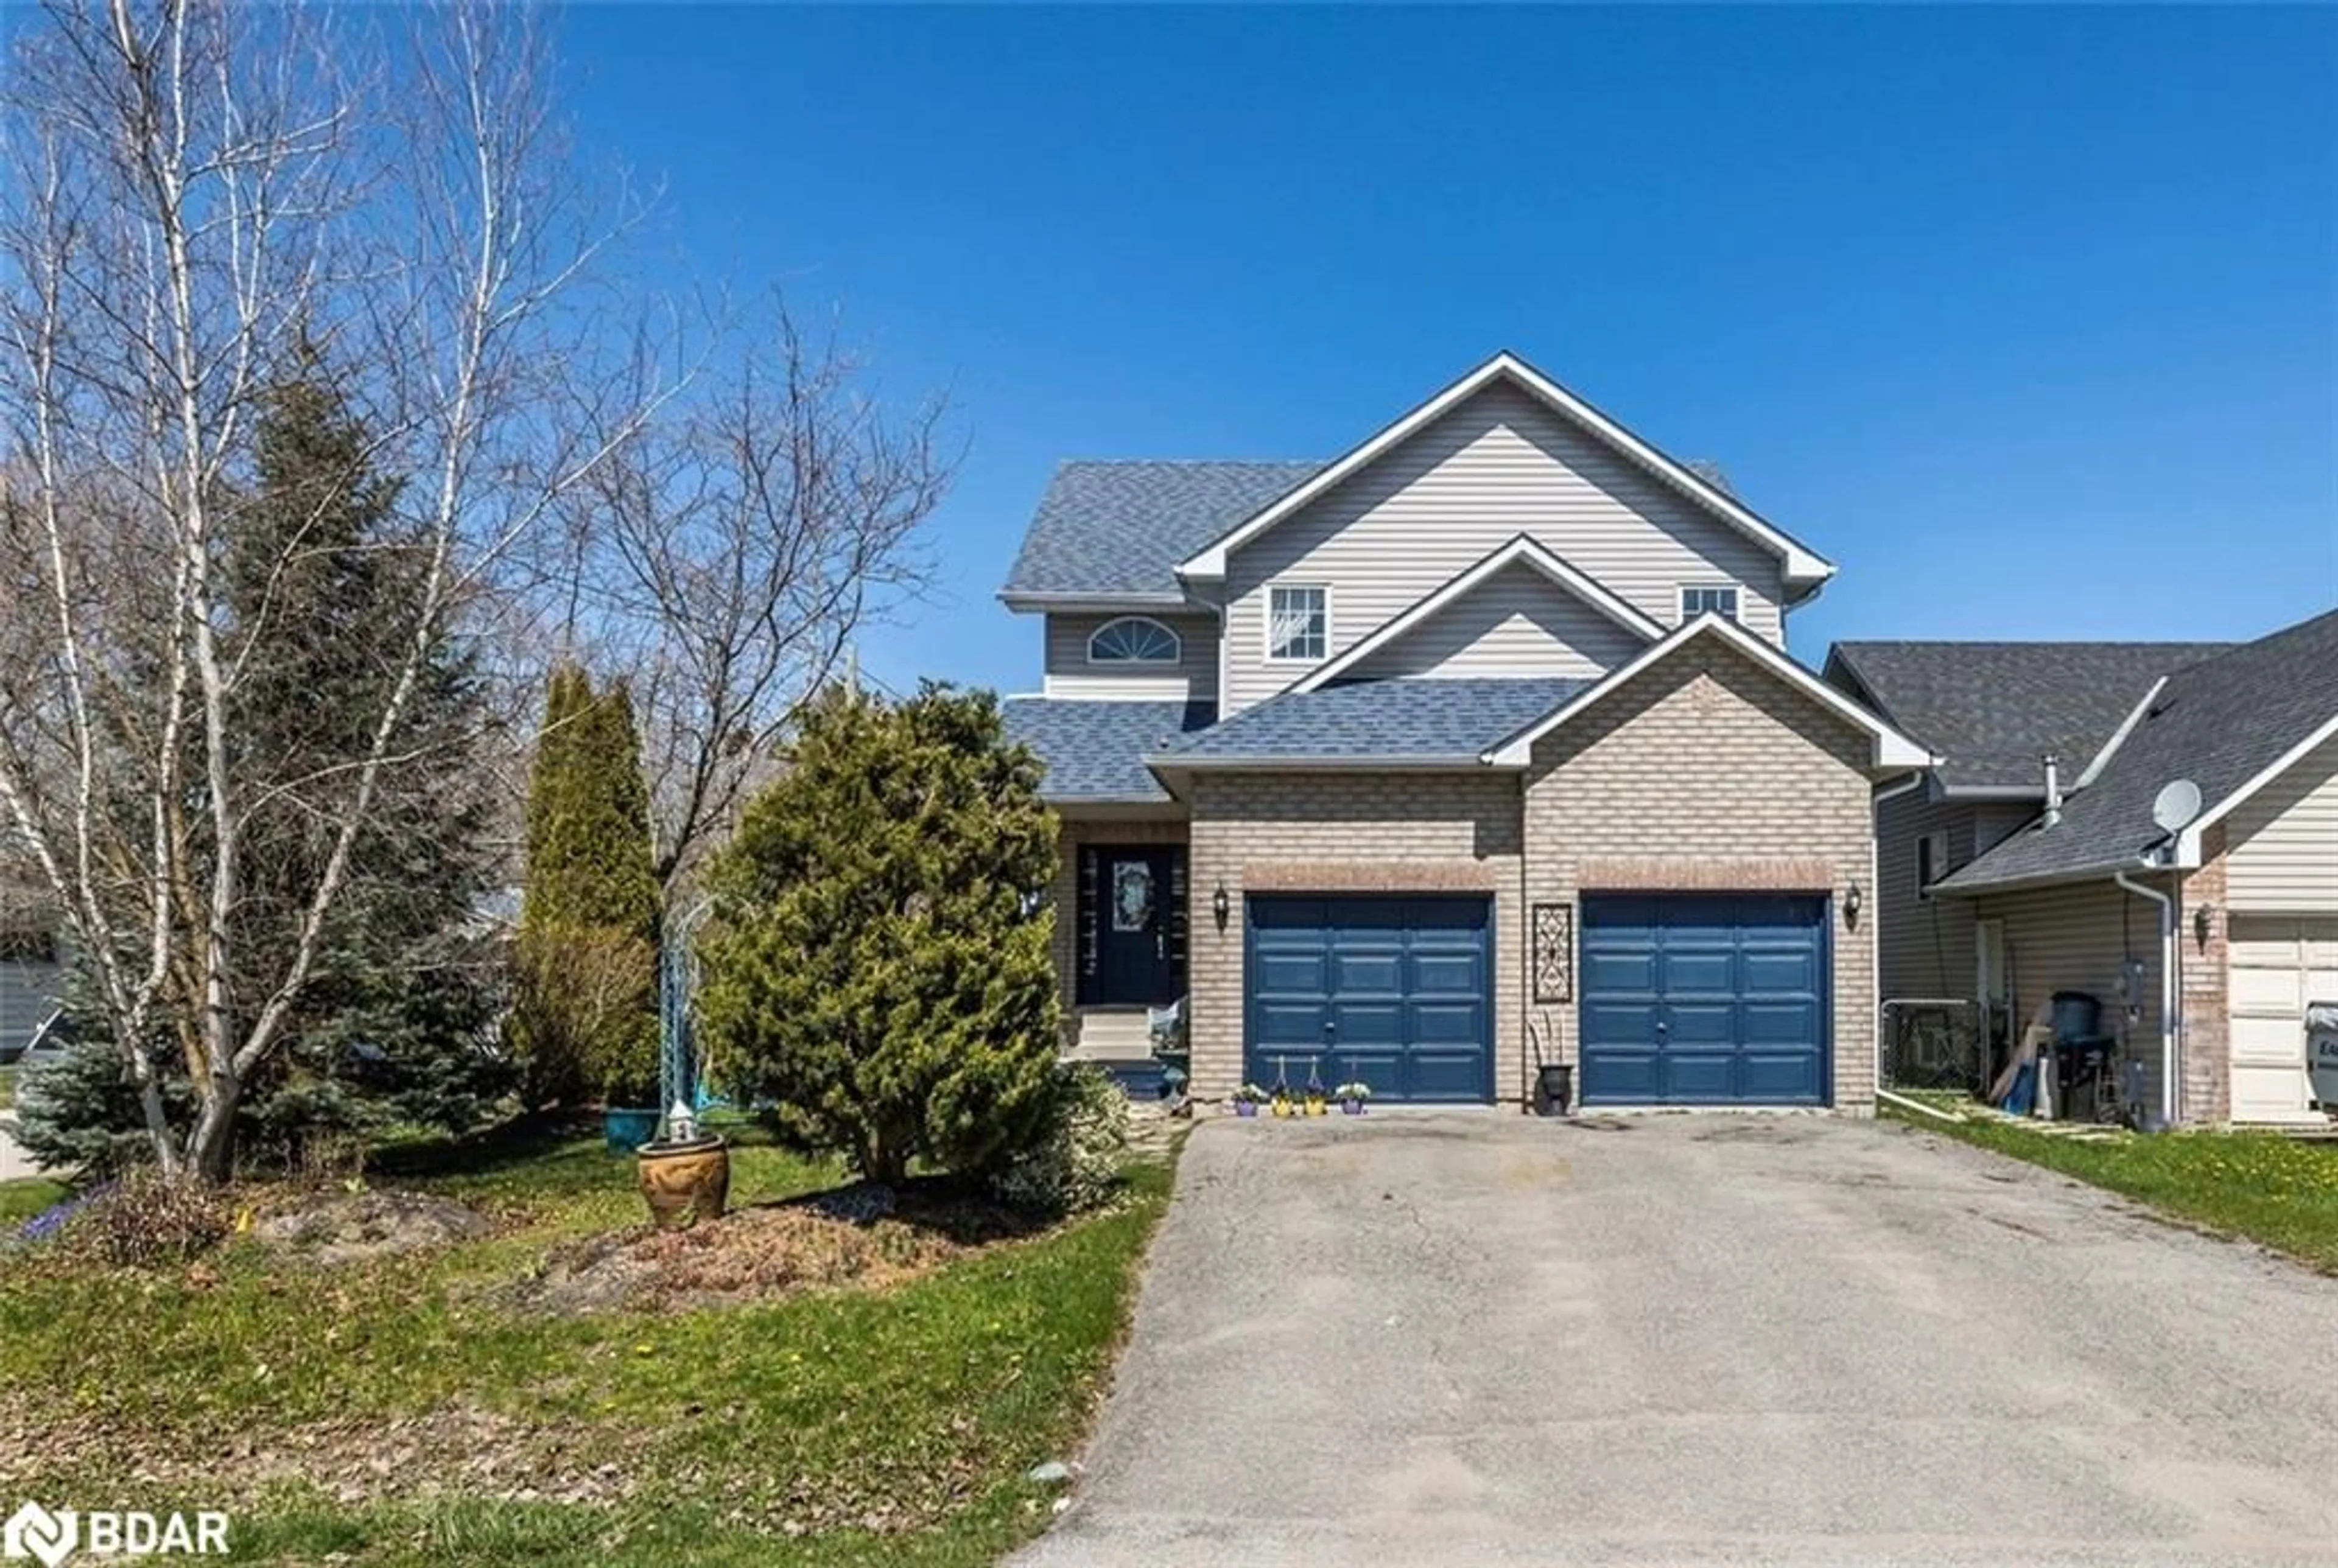 Frontside or backside of a home for 684 Lakelands Ave, Innisfil Ontario L9S 4E6